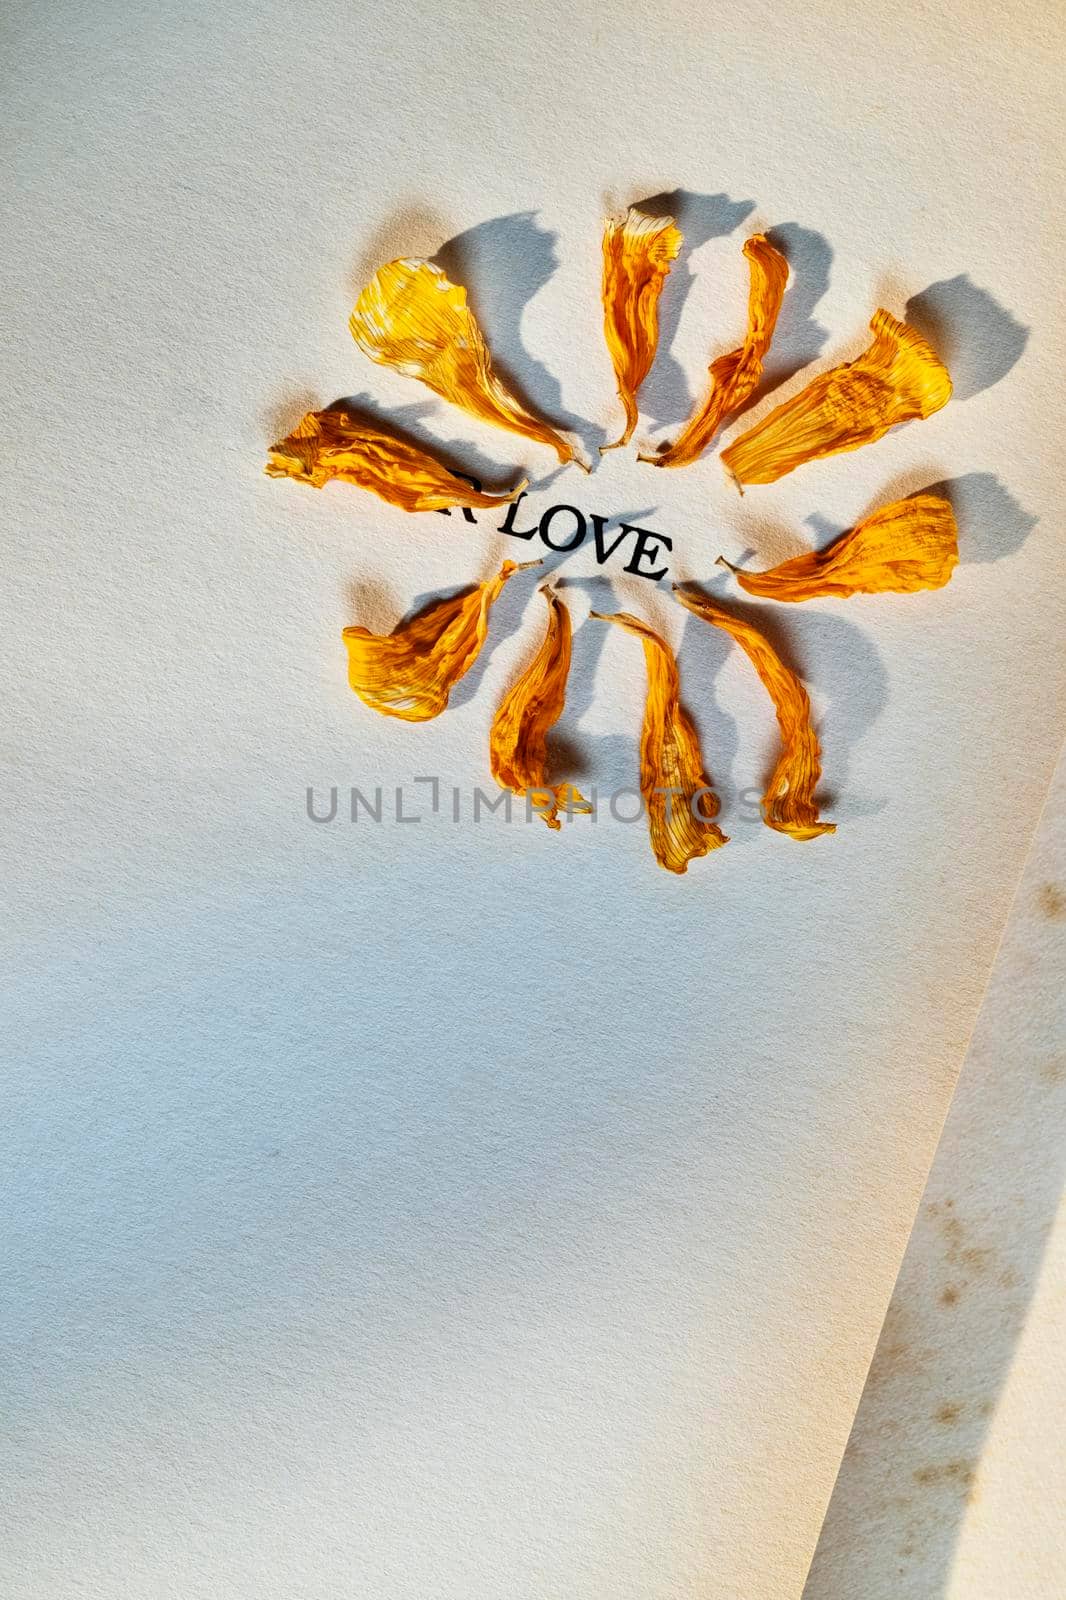 Dried petals and word LOVE by victimewalker